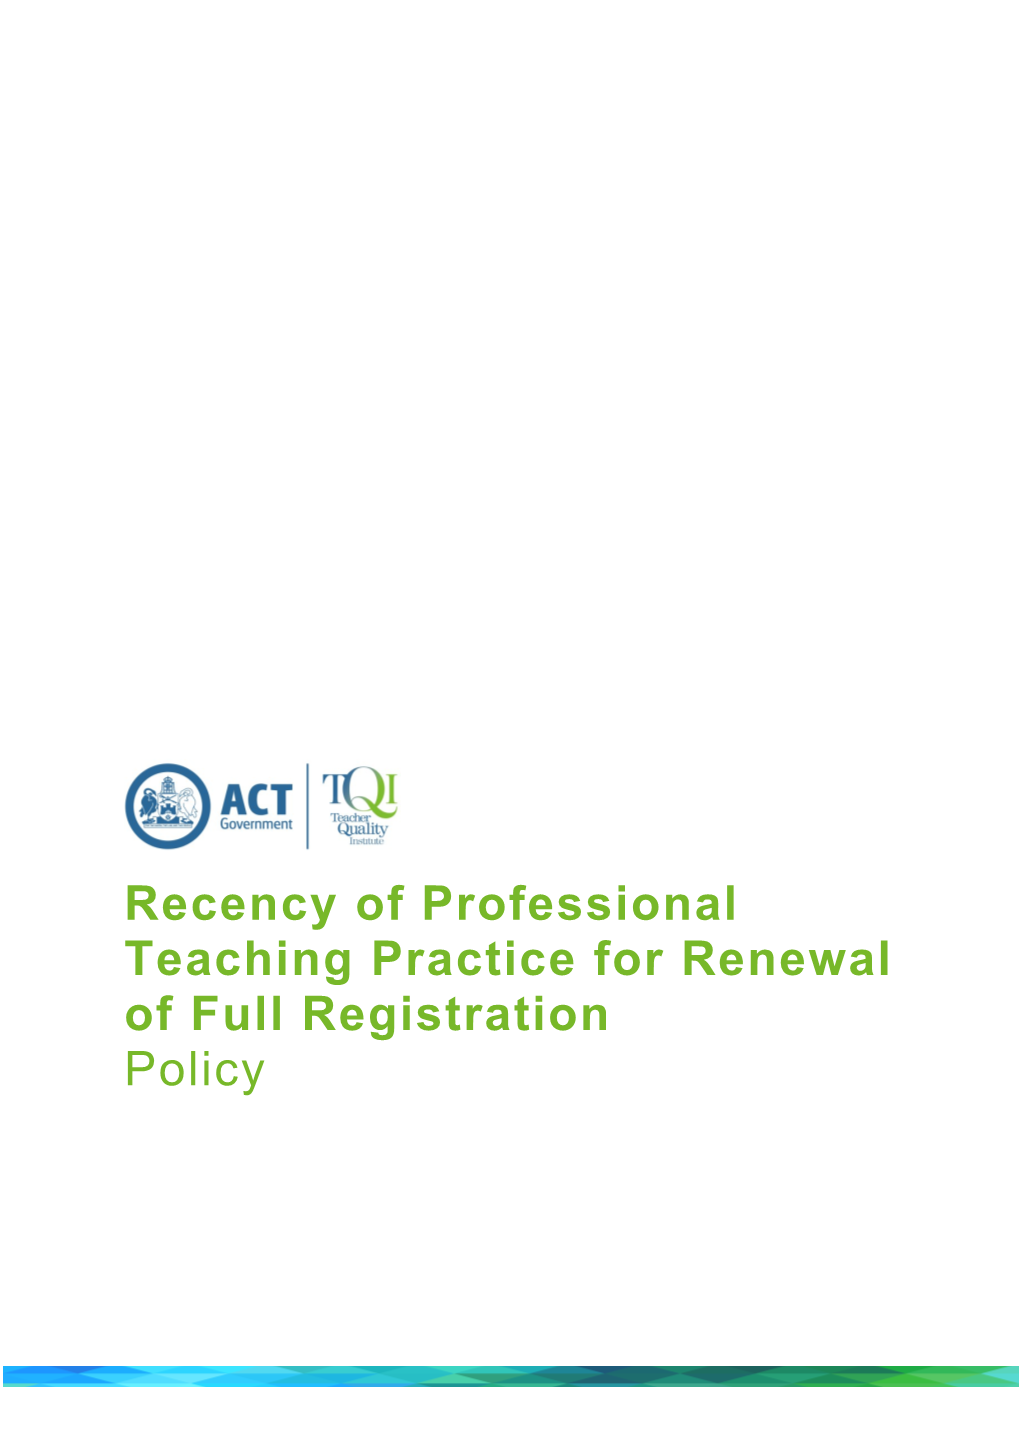 Recency of Professional Teaching Practice for Renewal of Full Registration Policy